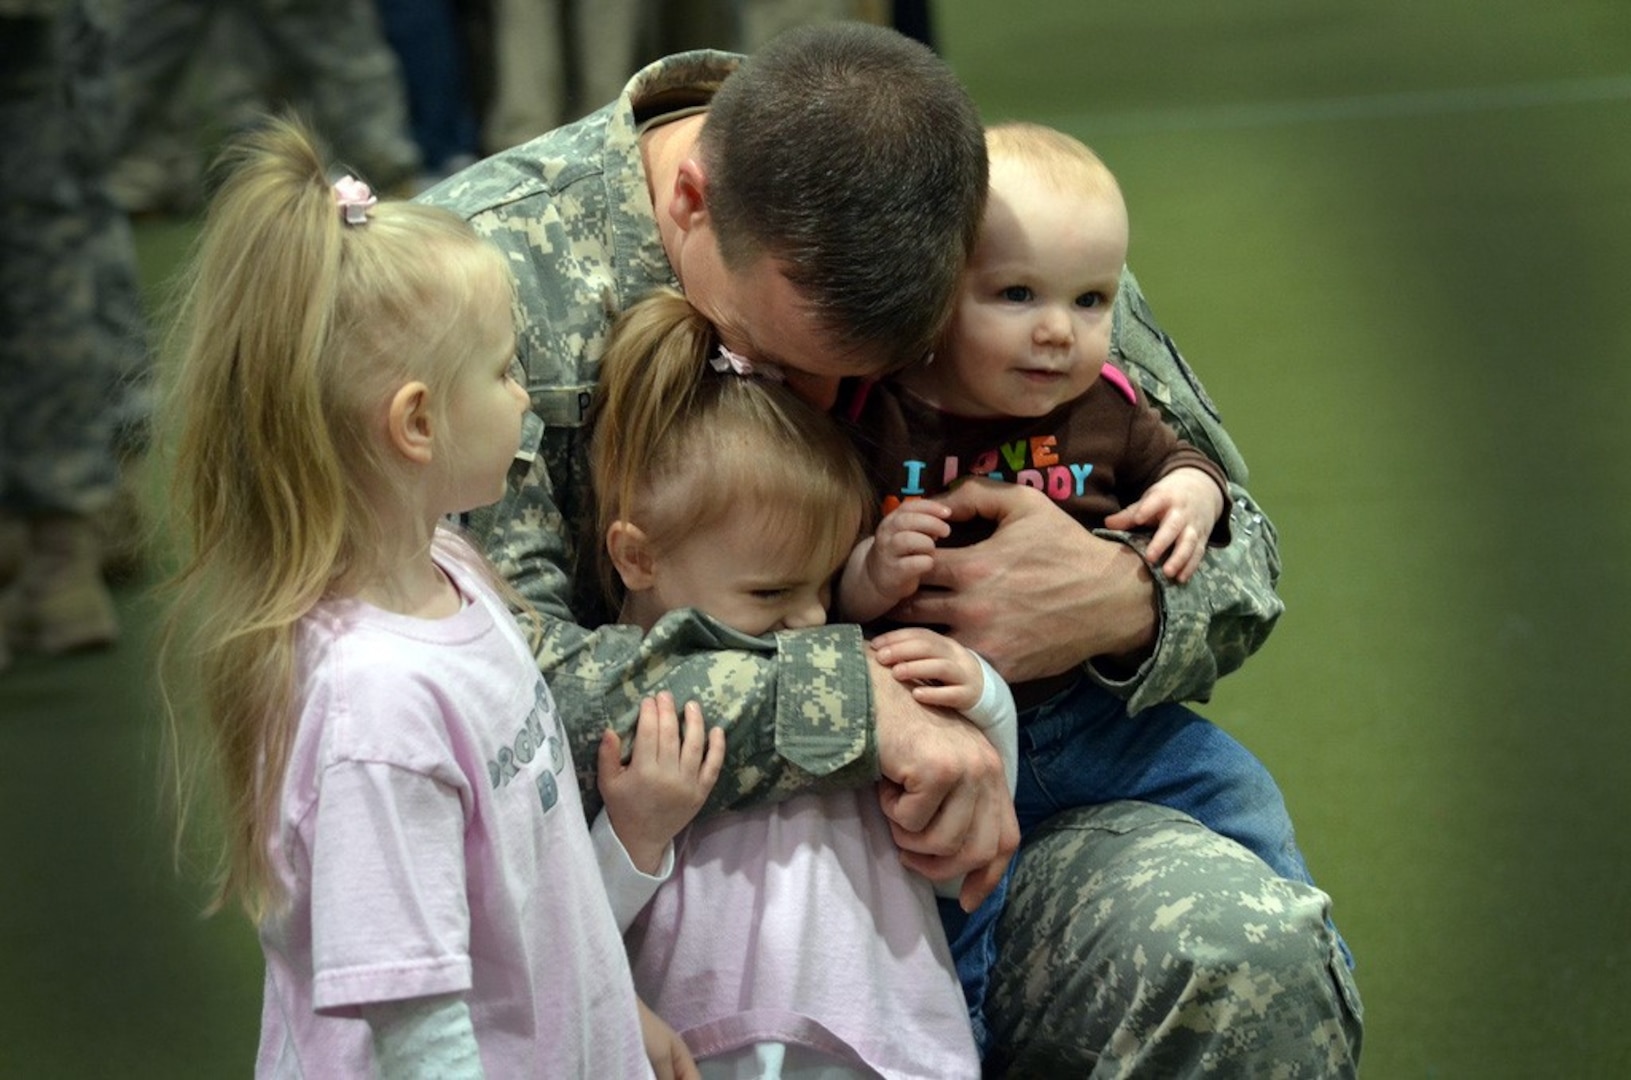 Army Sgt. 1st Class William Petit, Michigan Army National Guard, hugs his children at a deployment ceremony for the Headquarters, Headquarters Detachment, 210th Military Police Battalion February 15, 2012. The 72 members of the 210th are departing for their deployment to Afghanistan.